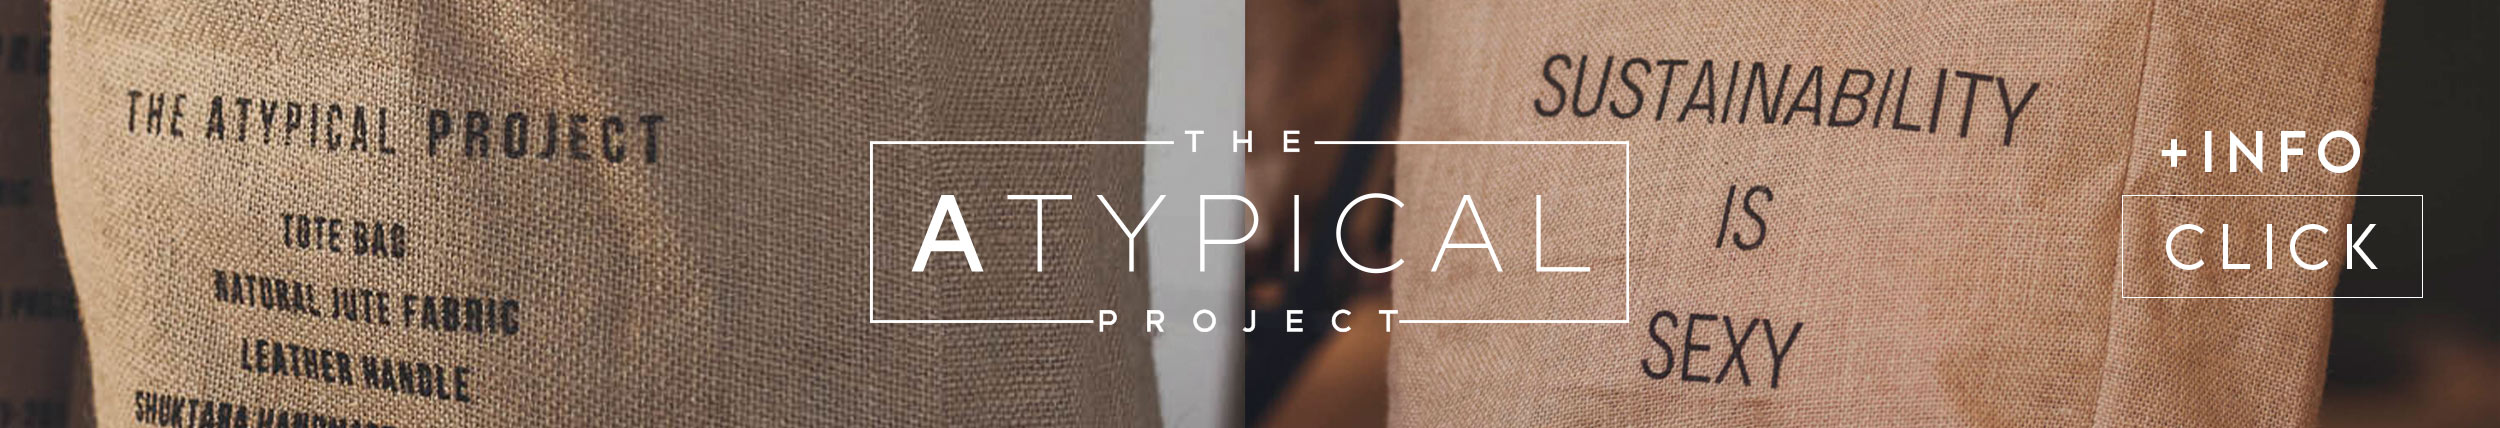 The Atypical Project